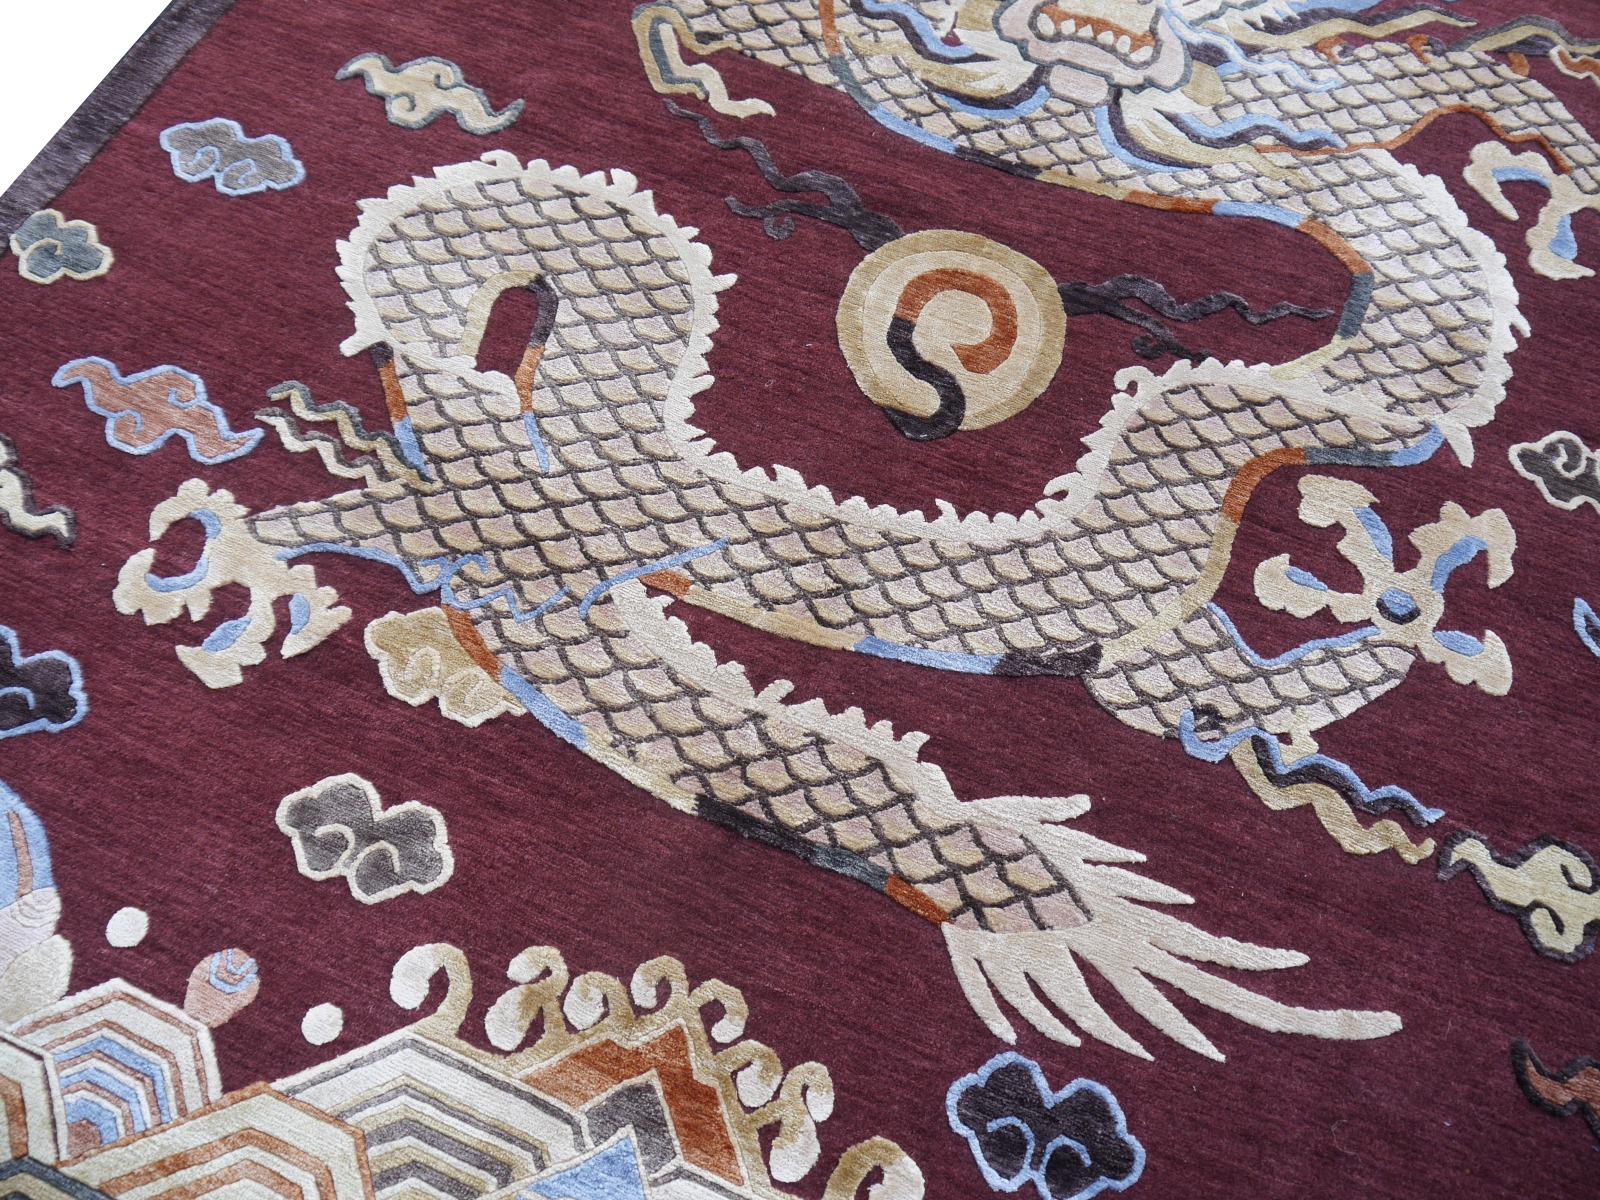 Nepalese Dragon Design Rug Wool and Silk in Style of Chinese Kansu Carpets